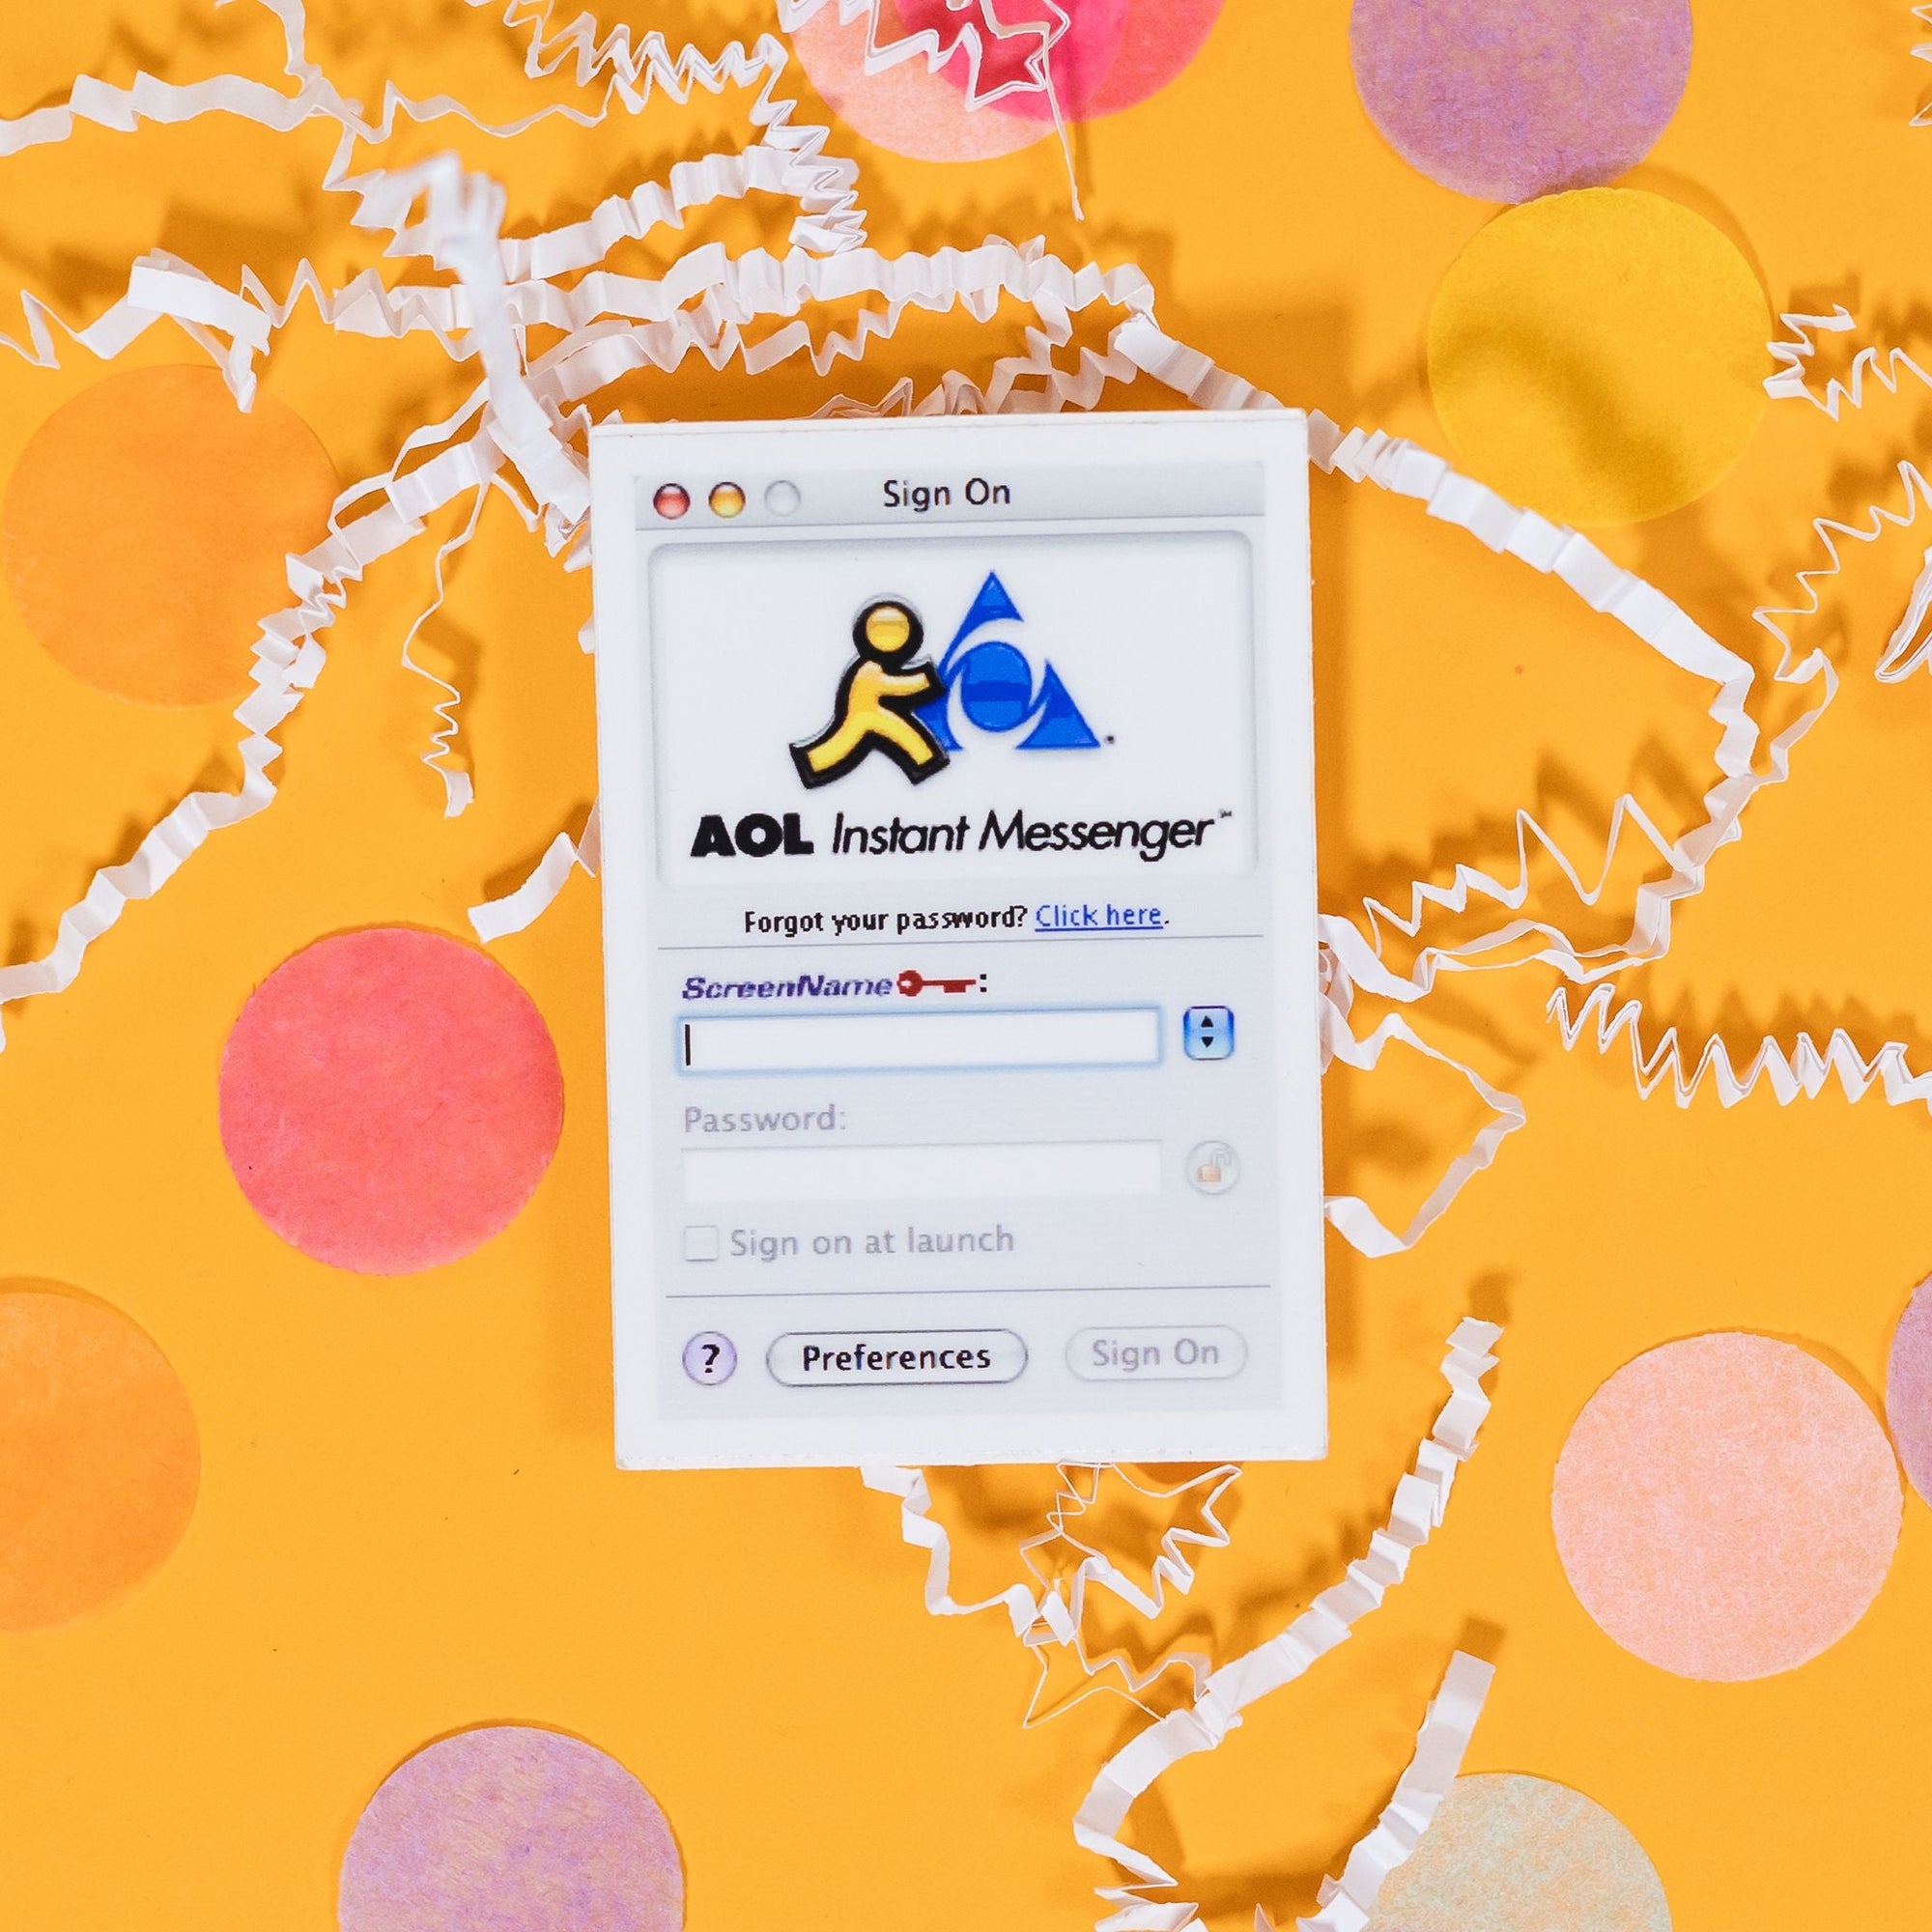 On a sunny mustard background sits a sticker with white crinkle and big, colorful confetti scattered around. This white, rectangle sticker has an illustration of AOL Instant Messenger logo in yello, black and blue at the top and says "Sign On", "AOL Instant Messenger", "Forgot your password? Click here. (underlined)," "ScreenName (with a red key next to it)," "Password:," "Sign on at Launch (with a square in front of it),", "? (in a lavender circle)," "Preferences," "Sign On."